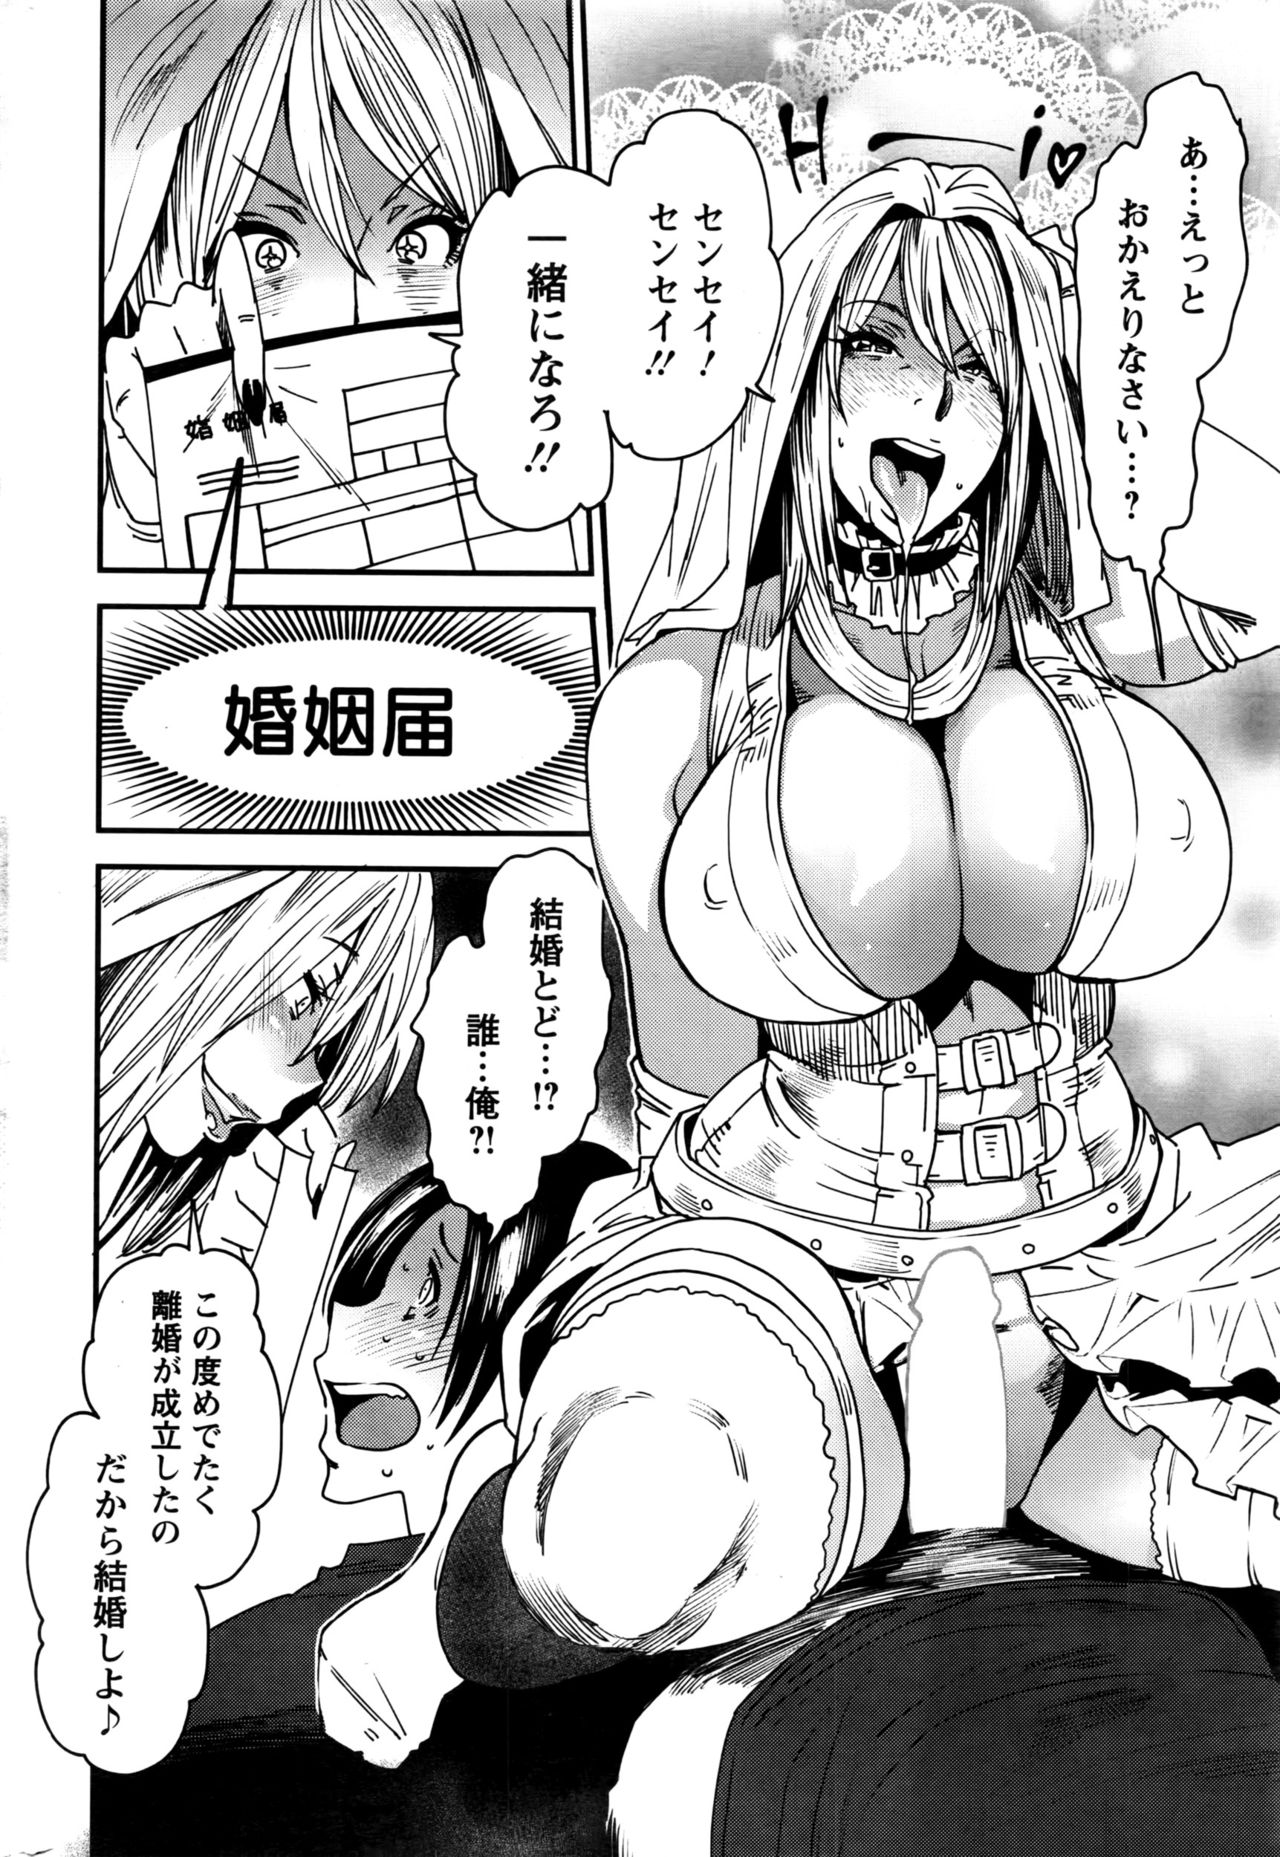 Action Pizazz 2016-07 page 35 full